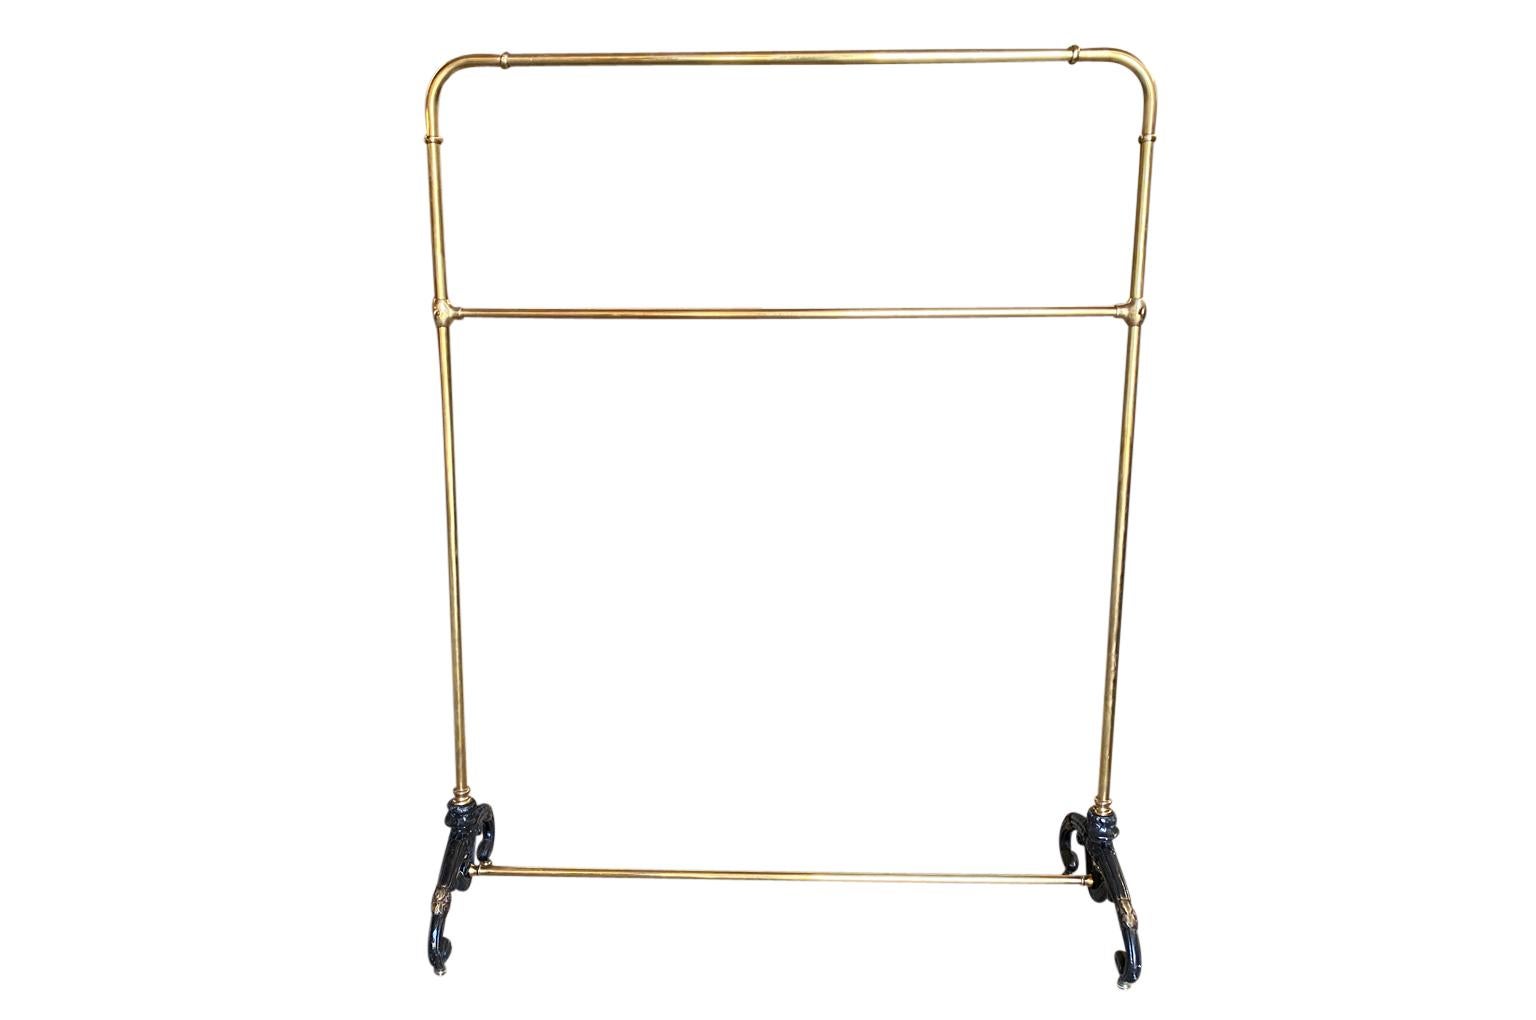 A wonderful late 19th century French Portant - Garment Rack origining from the House of Jeanne Lanvin in Paris,  Wonderful quality in brass and cast iron.  Perfect for a loft foyer, large master closet, restaurant or as a store display piece.